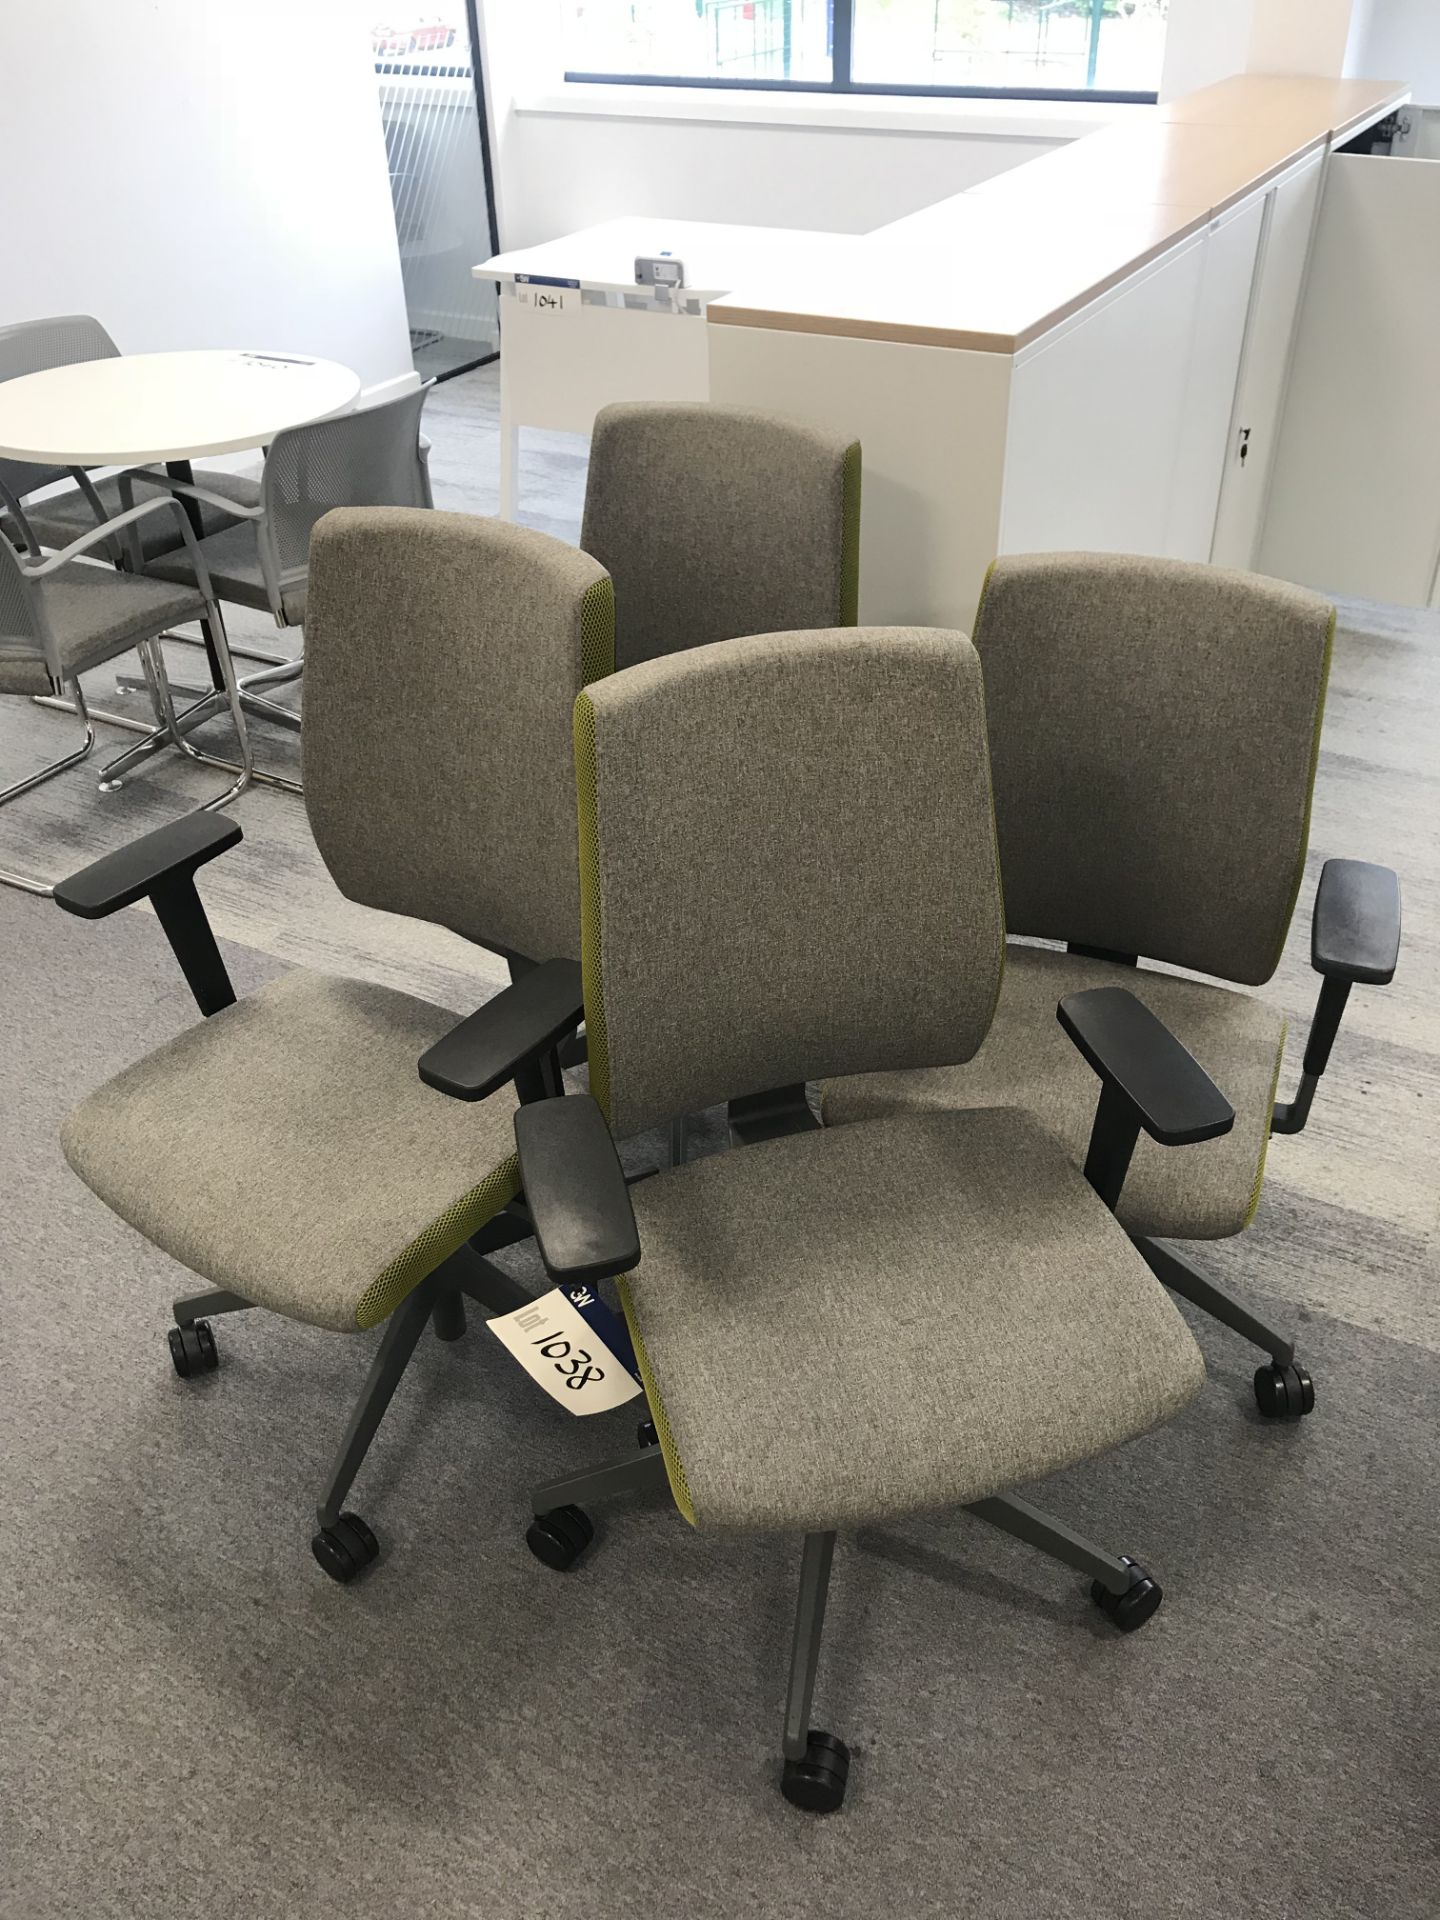 4 x Grey and Green Upholstered Typist Chairs